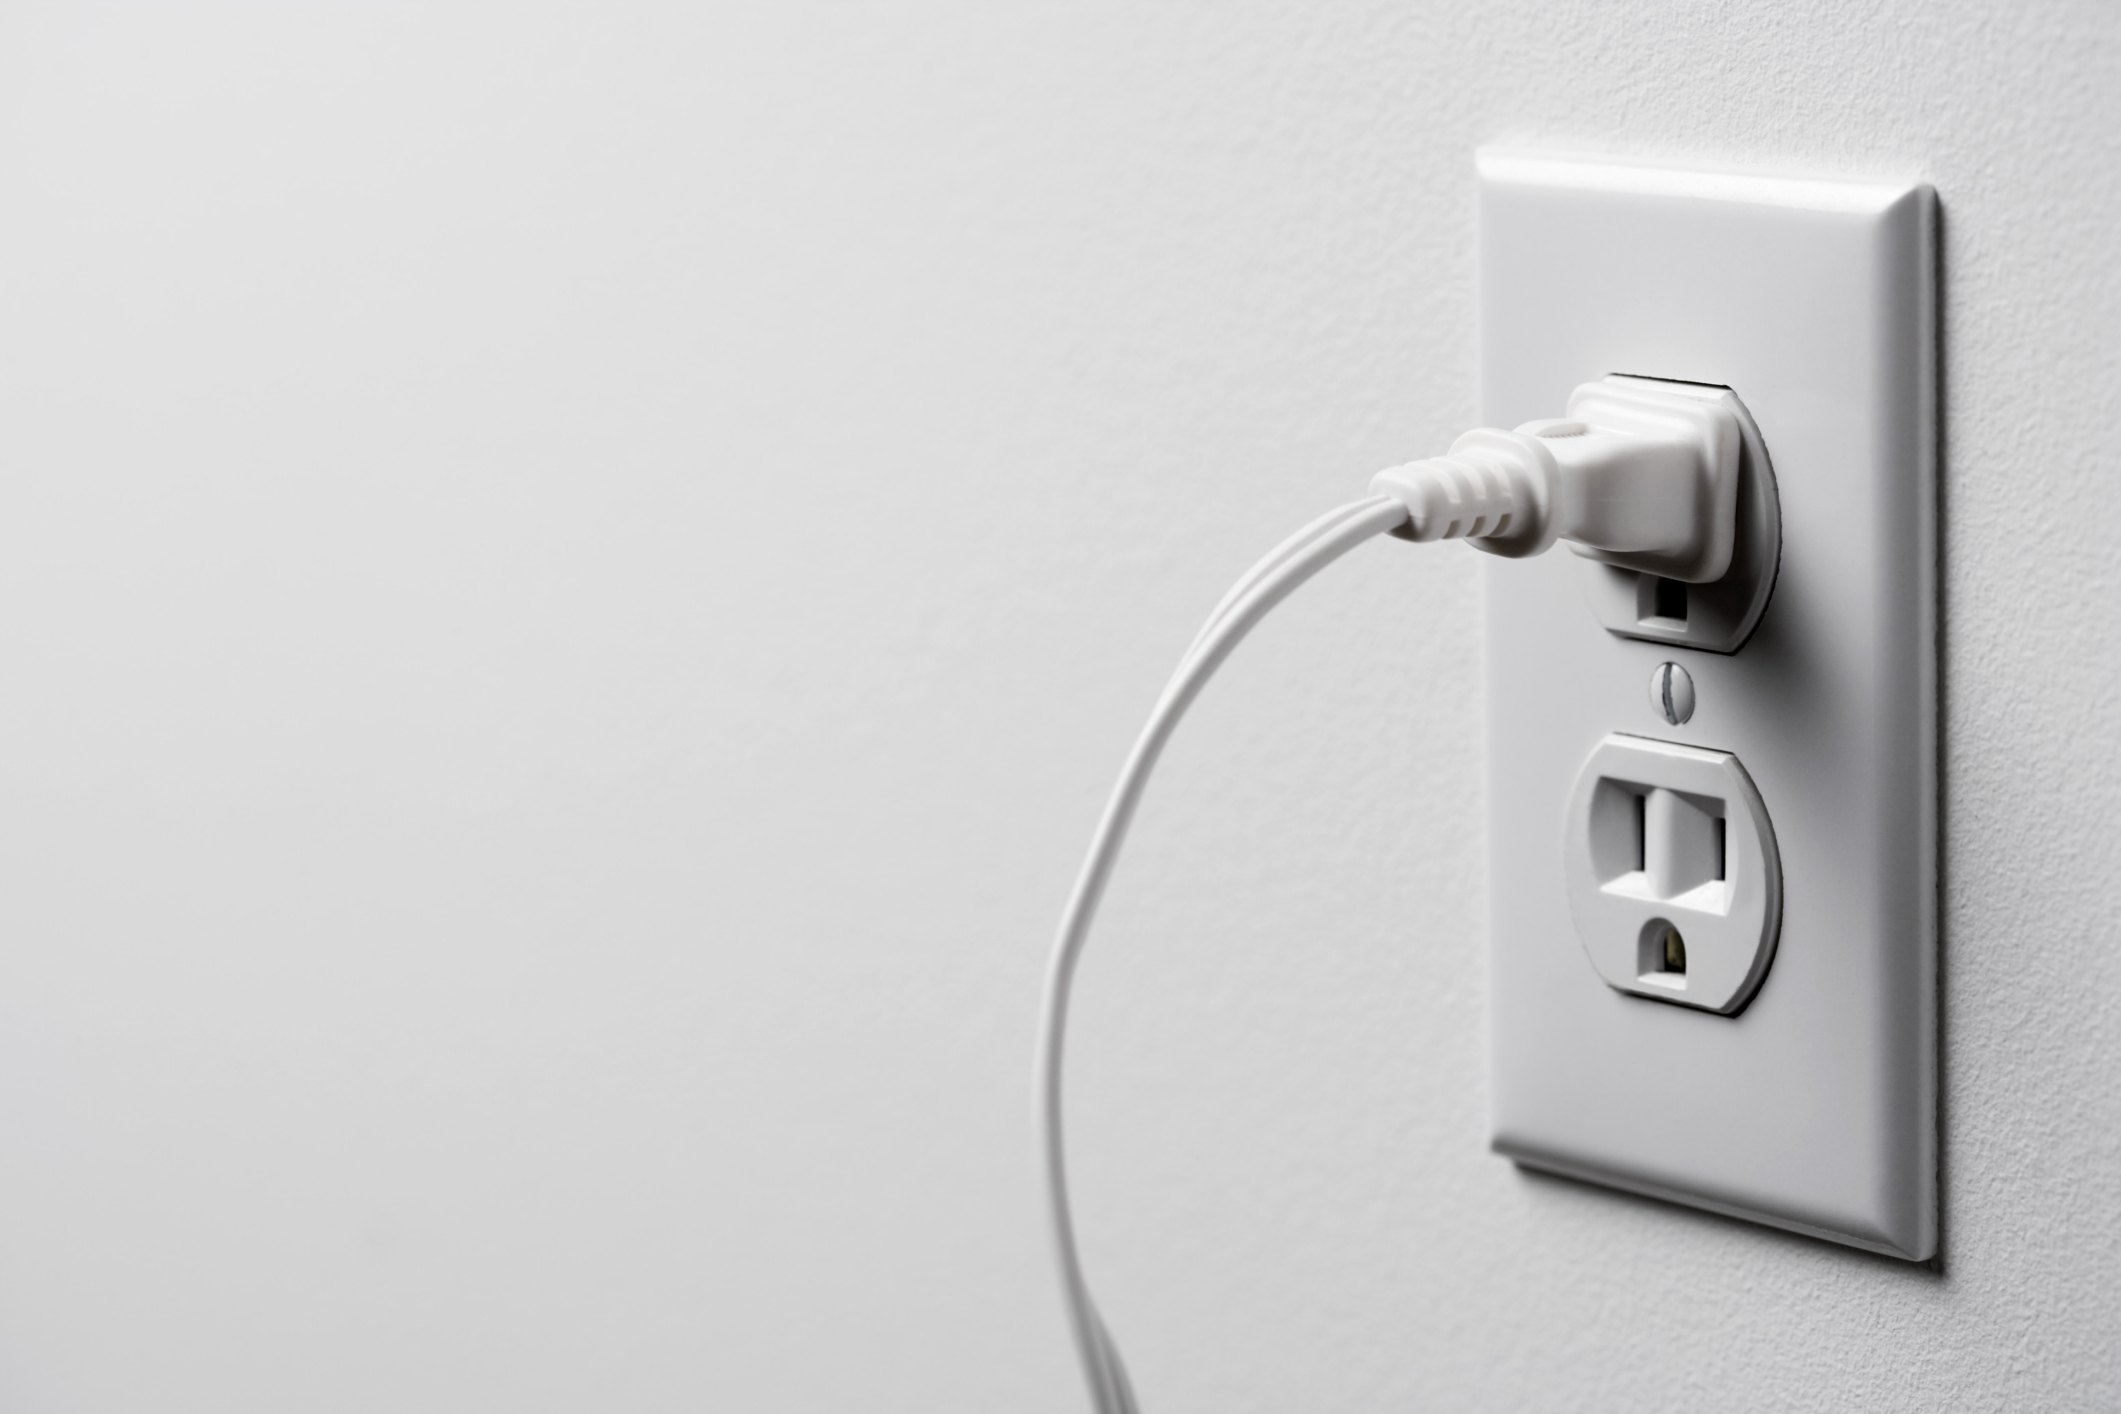 How to Change a Wall Outlet to Double Outlets eHow